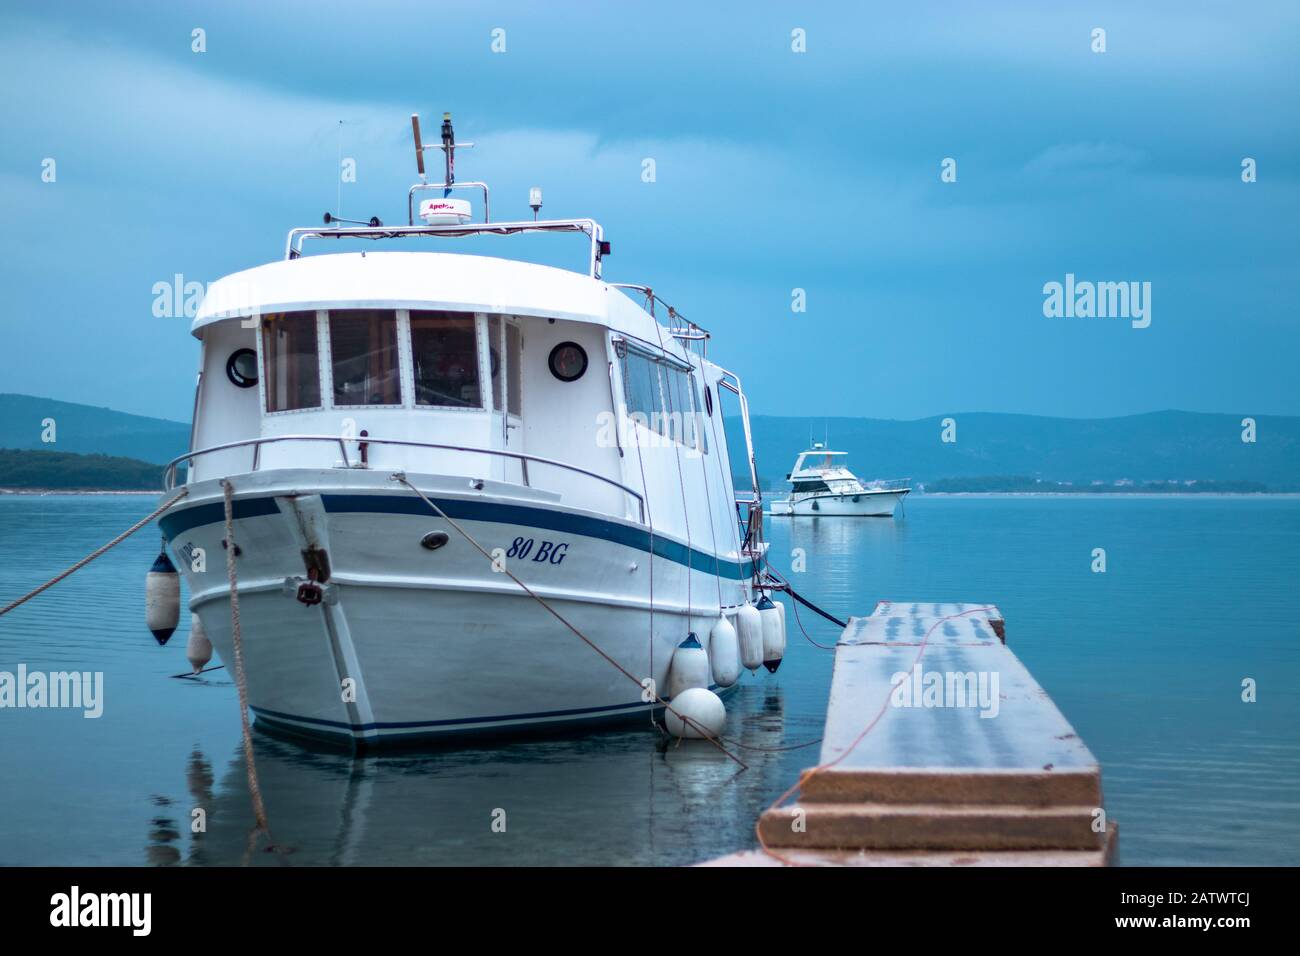 Big Croatian traditional fishing boat anchored on a small stone pier Stock Photo